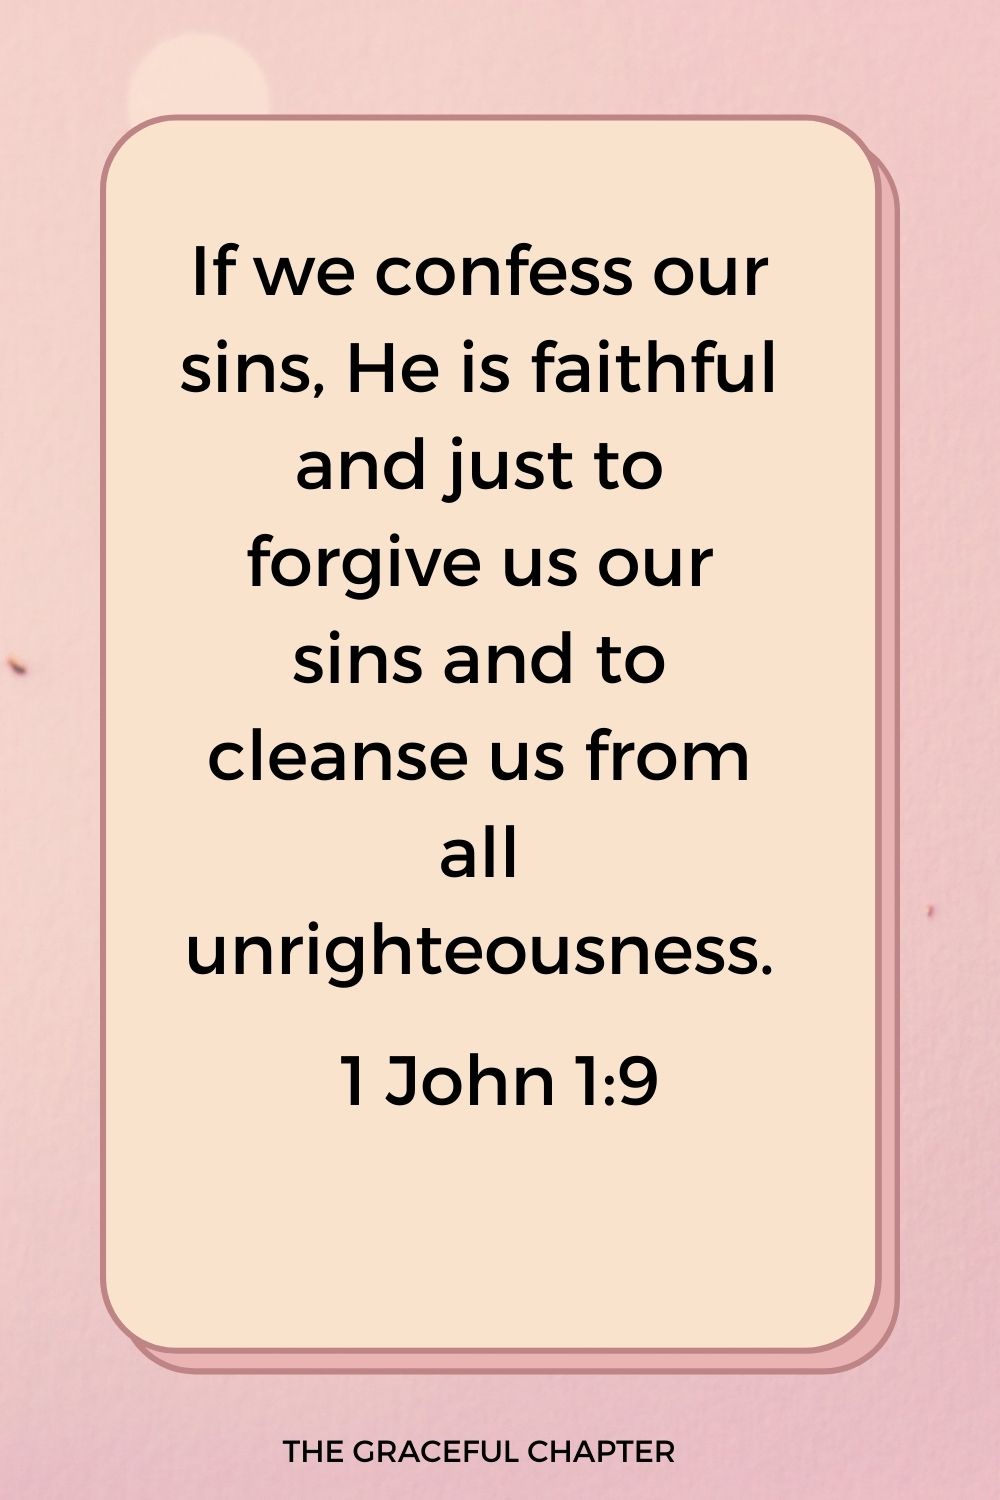 If we confess our sins, He is faithful and just to forgive us our sins and to cleanse us from all unrighteousness. 1 John 1:9